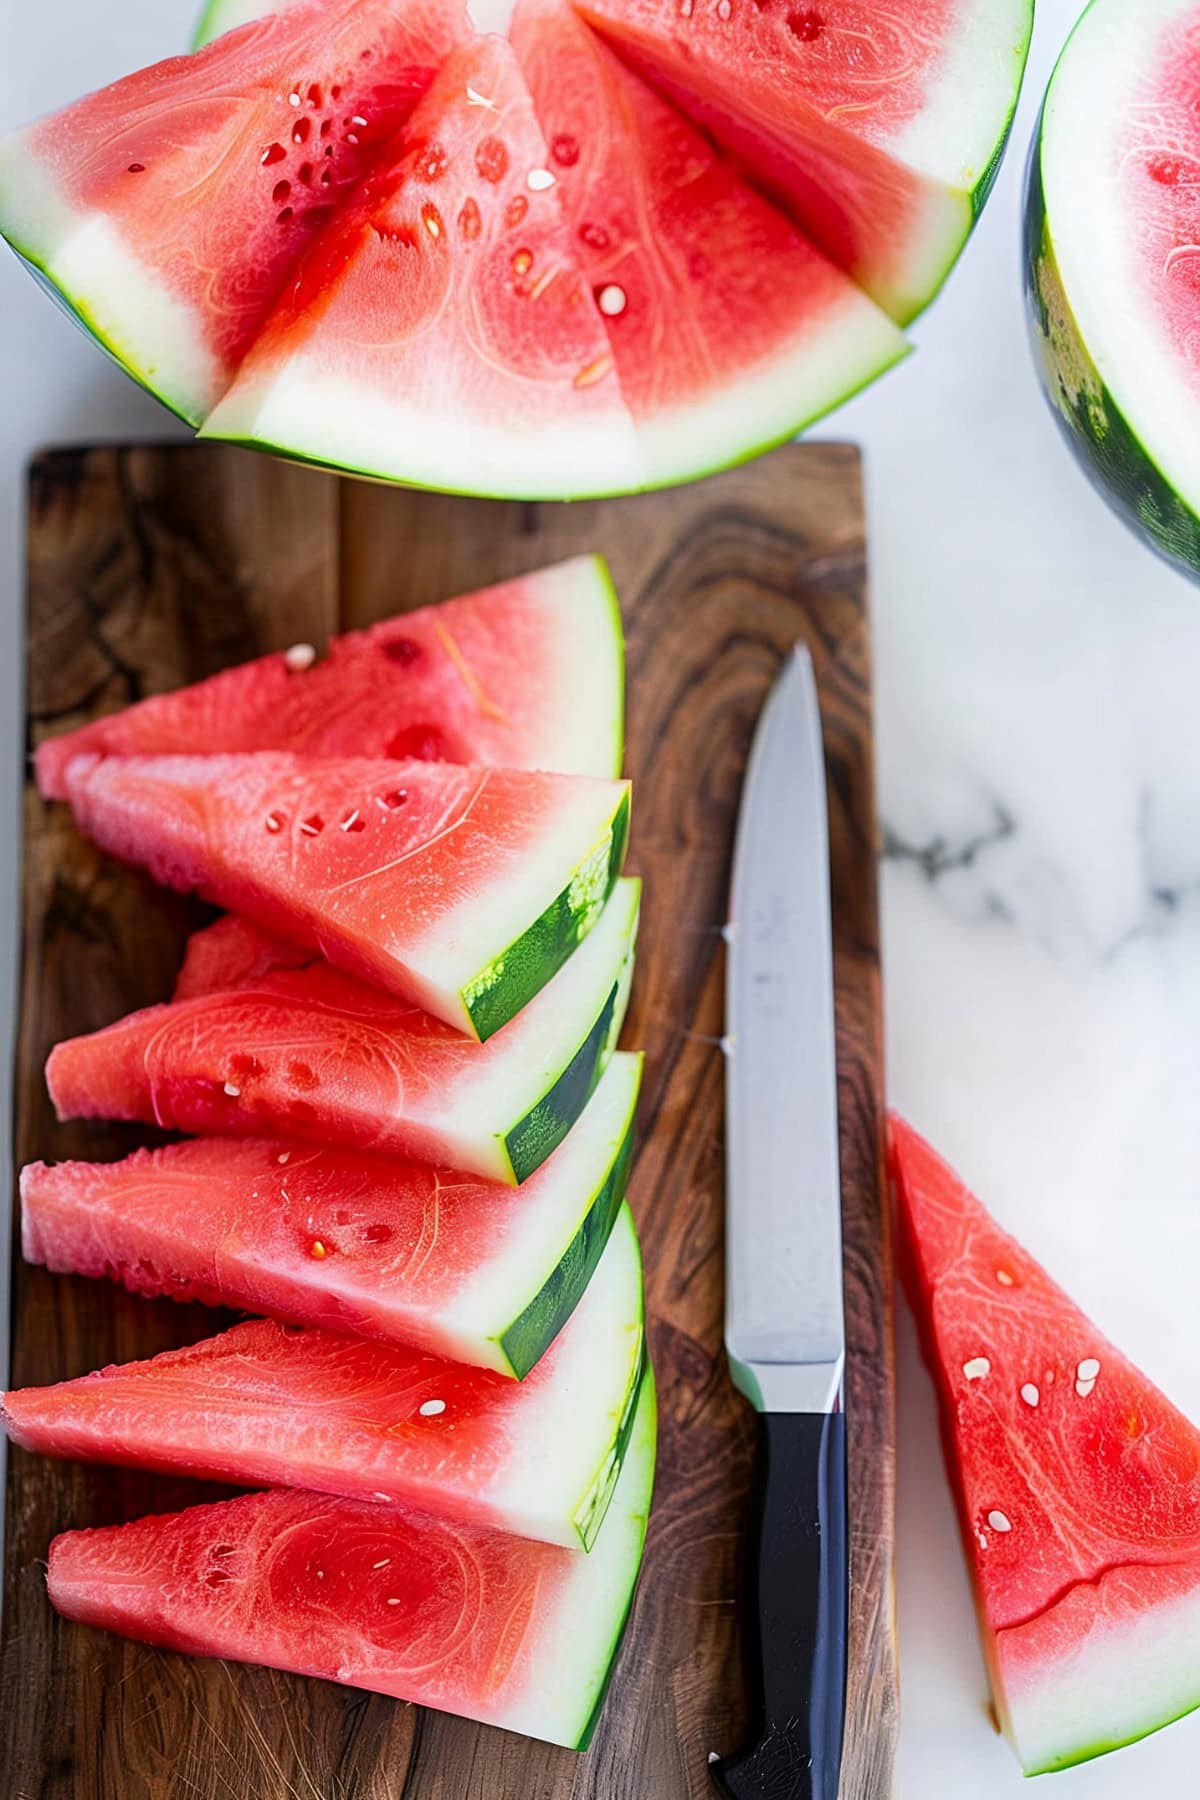 Sliced watermelon in a wooden cutting board with knife